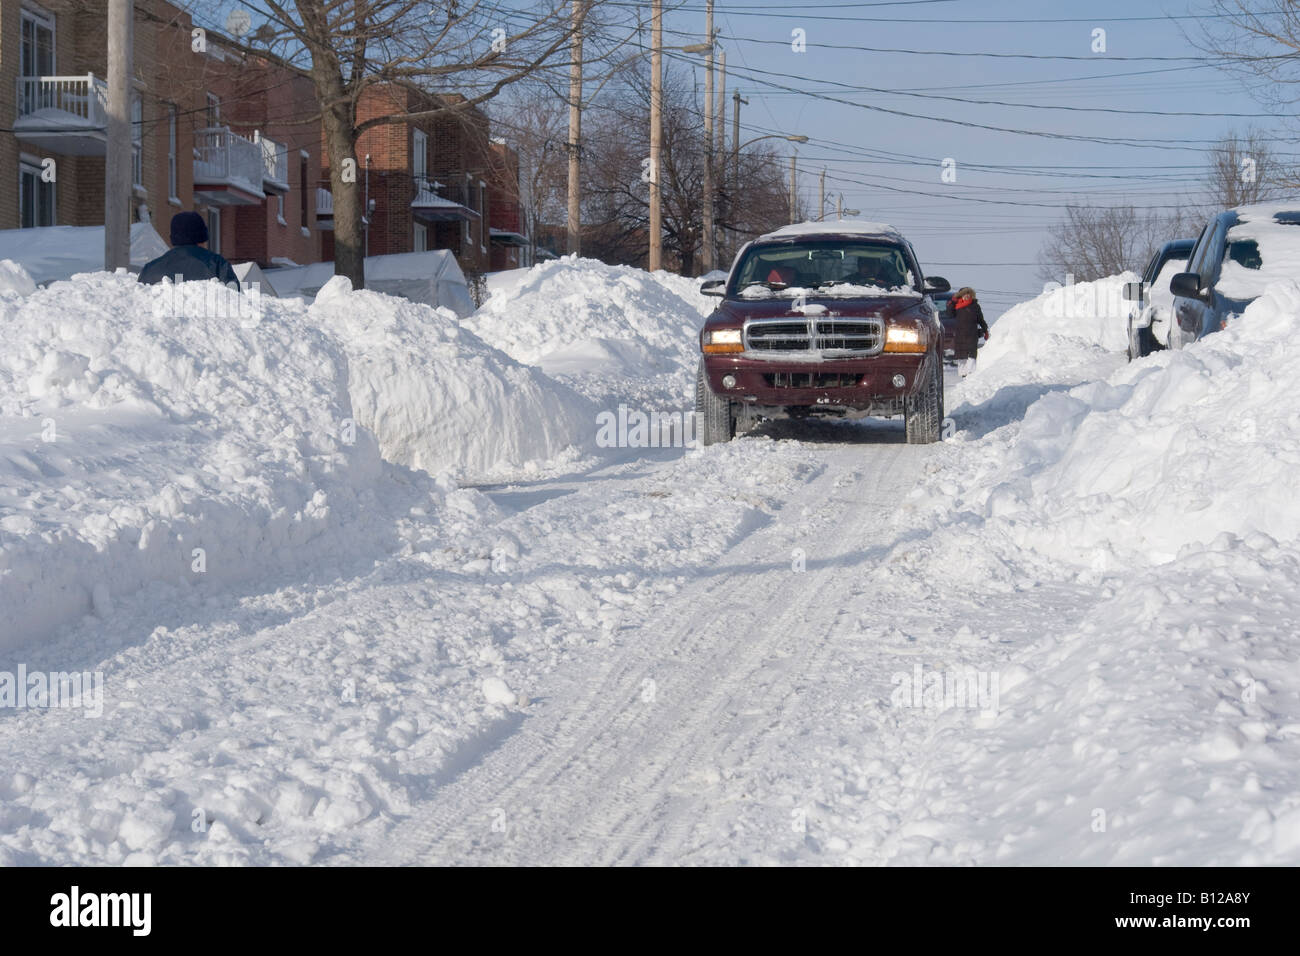 A scene along snow bound Montreal suburban street after a heavy snow ...